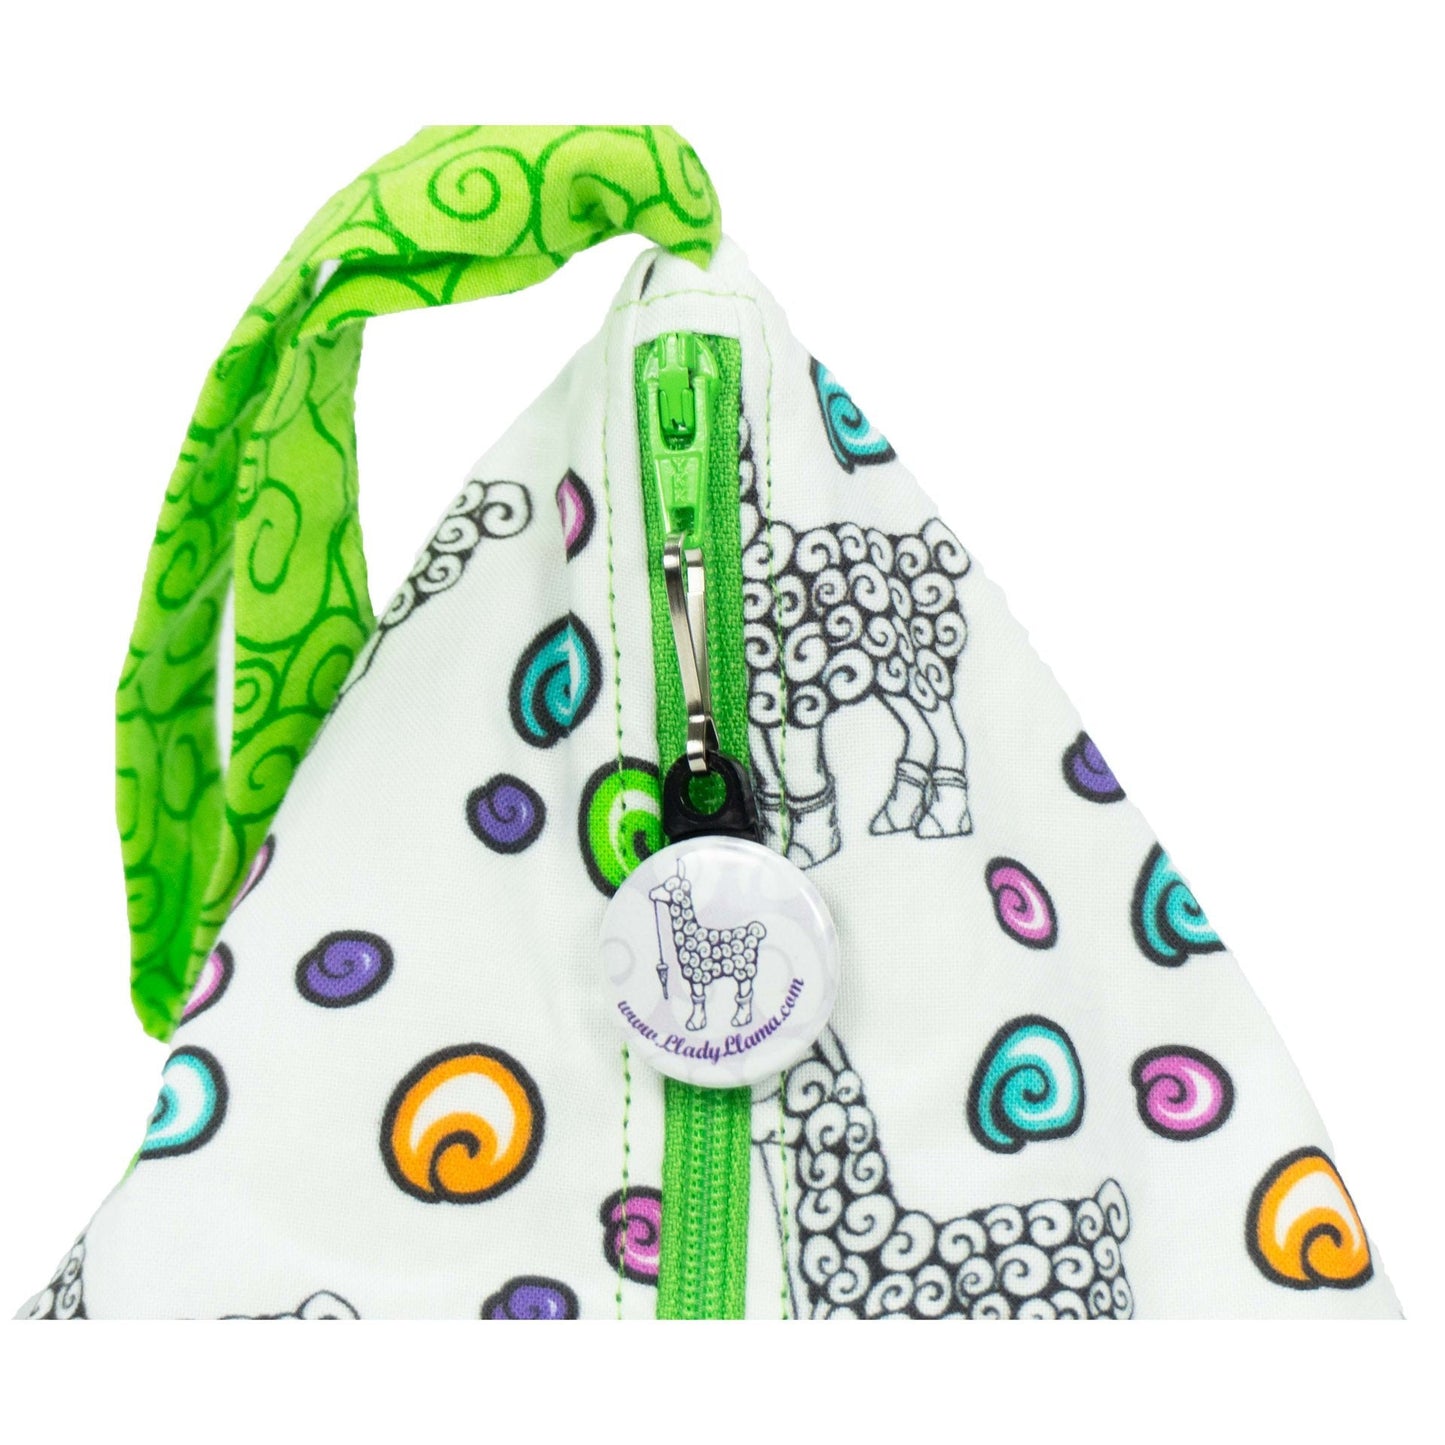 Elli White w/Green Swirl - Llexical Divided Sock Pouch - Knitting, Crochet, Spinning Project Bag